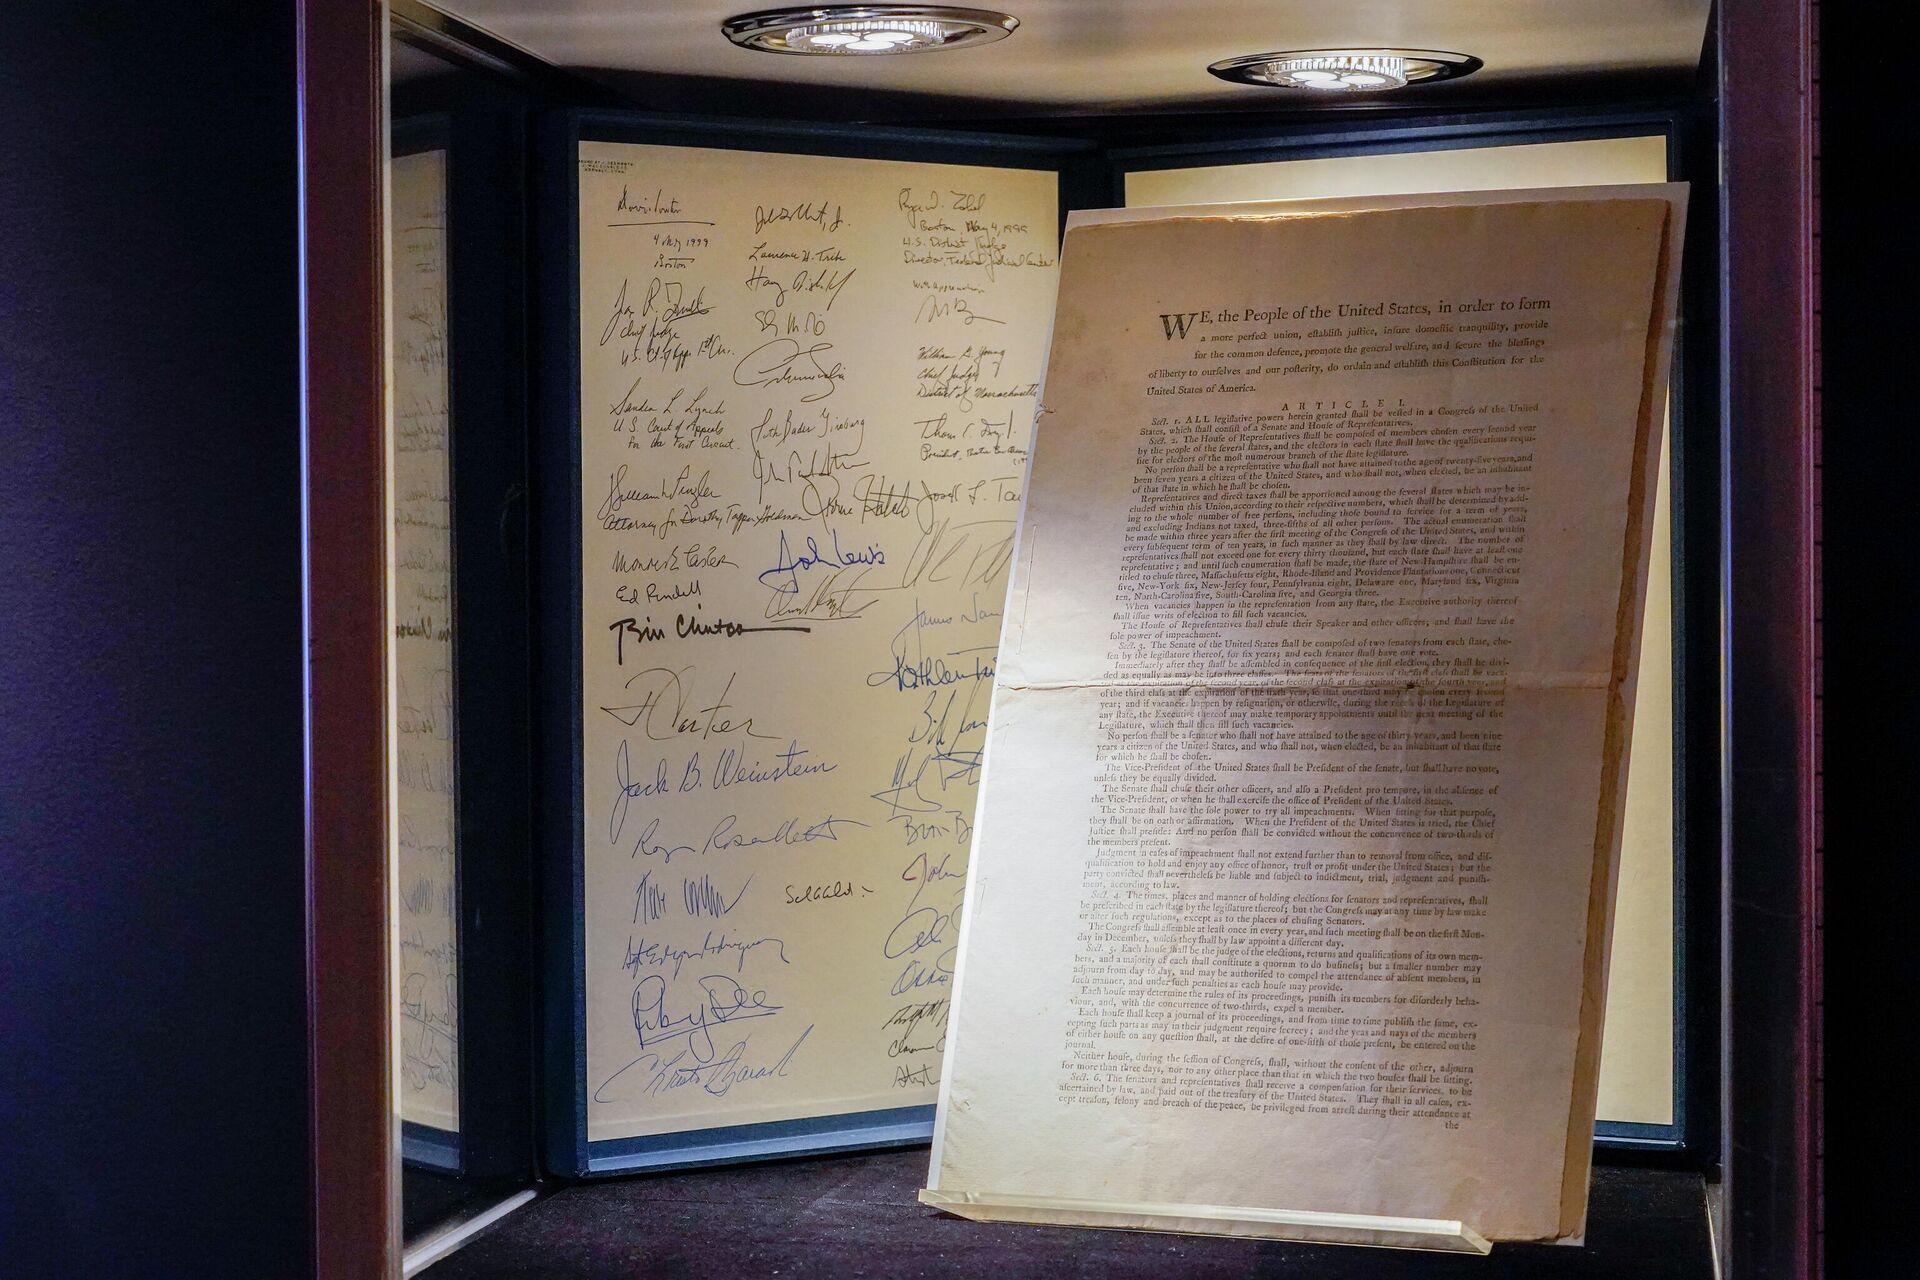 FILE - A first printing of the United States Constitution is displayed at Sotheby's auction house during a press preview on Nov. 5, 2021, in New York. The rare copy has sold Thursday, Nov. 18, for a record $43.2 million at Sotheby's to an anonymous buyer who outbid a group of crypocurrency investors. - Sputnik International, 1920, 06.05.2023